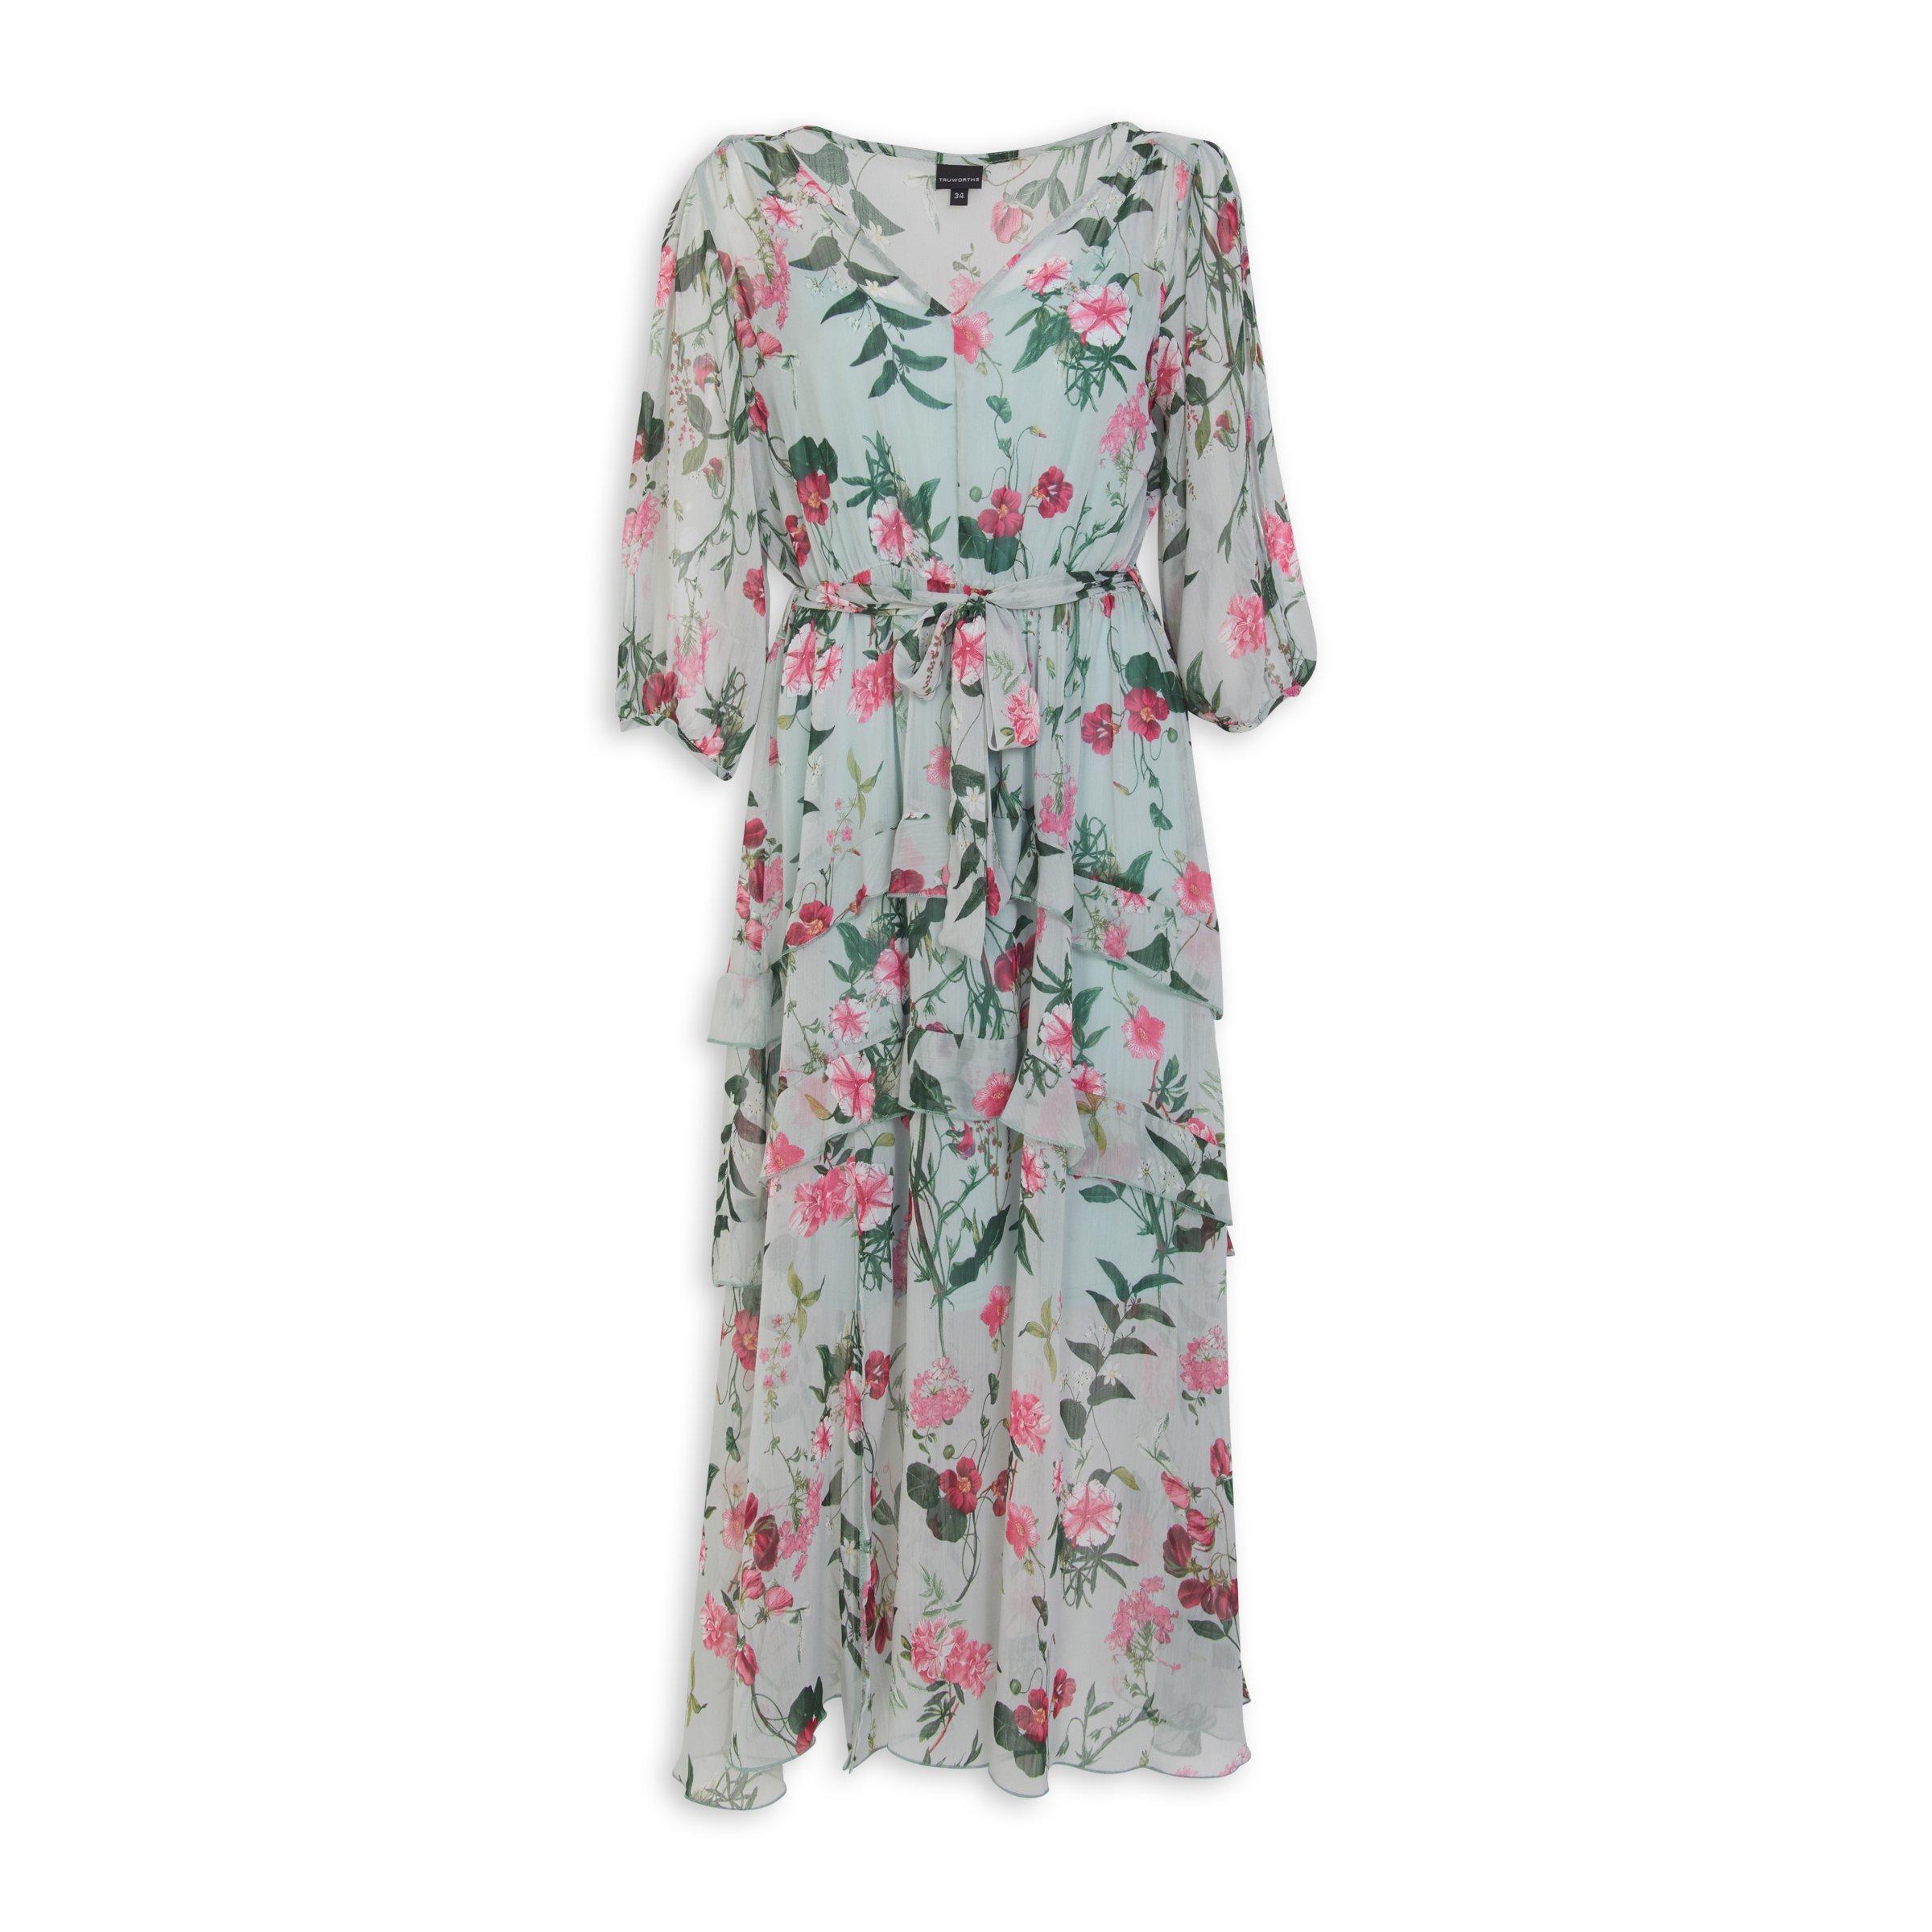 Floral Print Fit And Flare Dress 3118965 Truworths